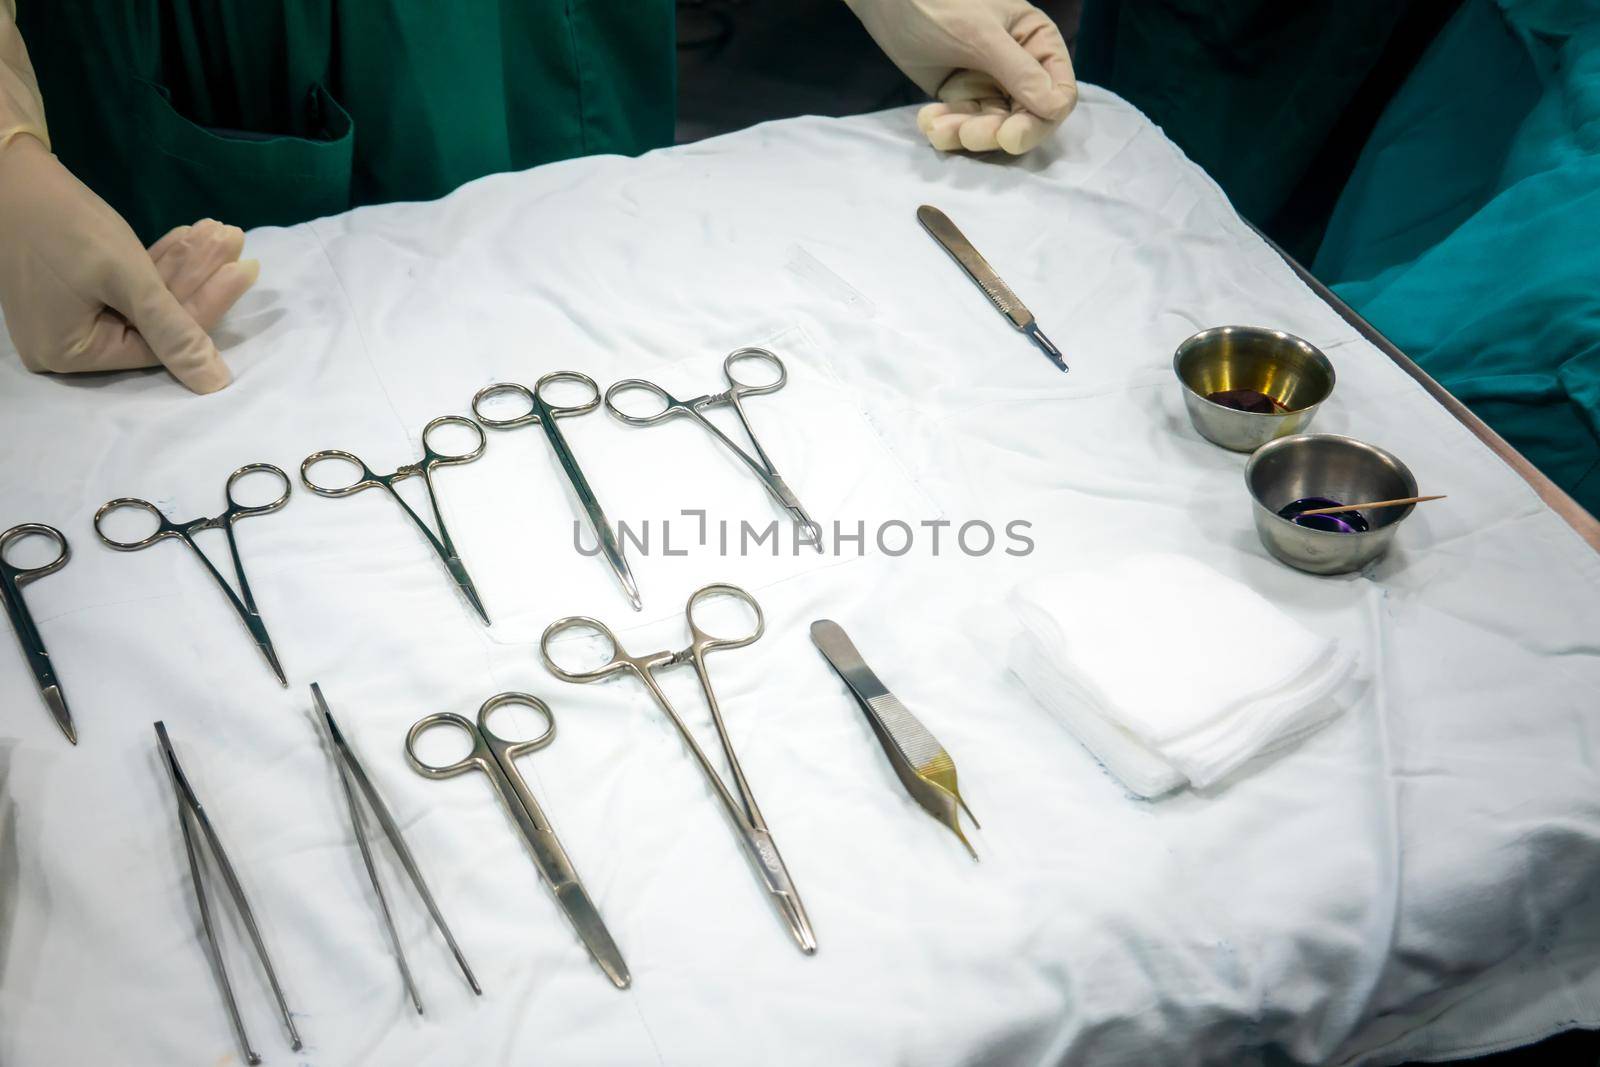 Above view on Surgical scissors in operation room by chuanchai